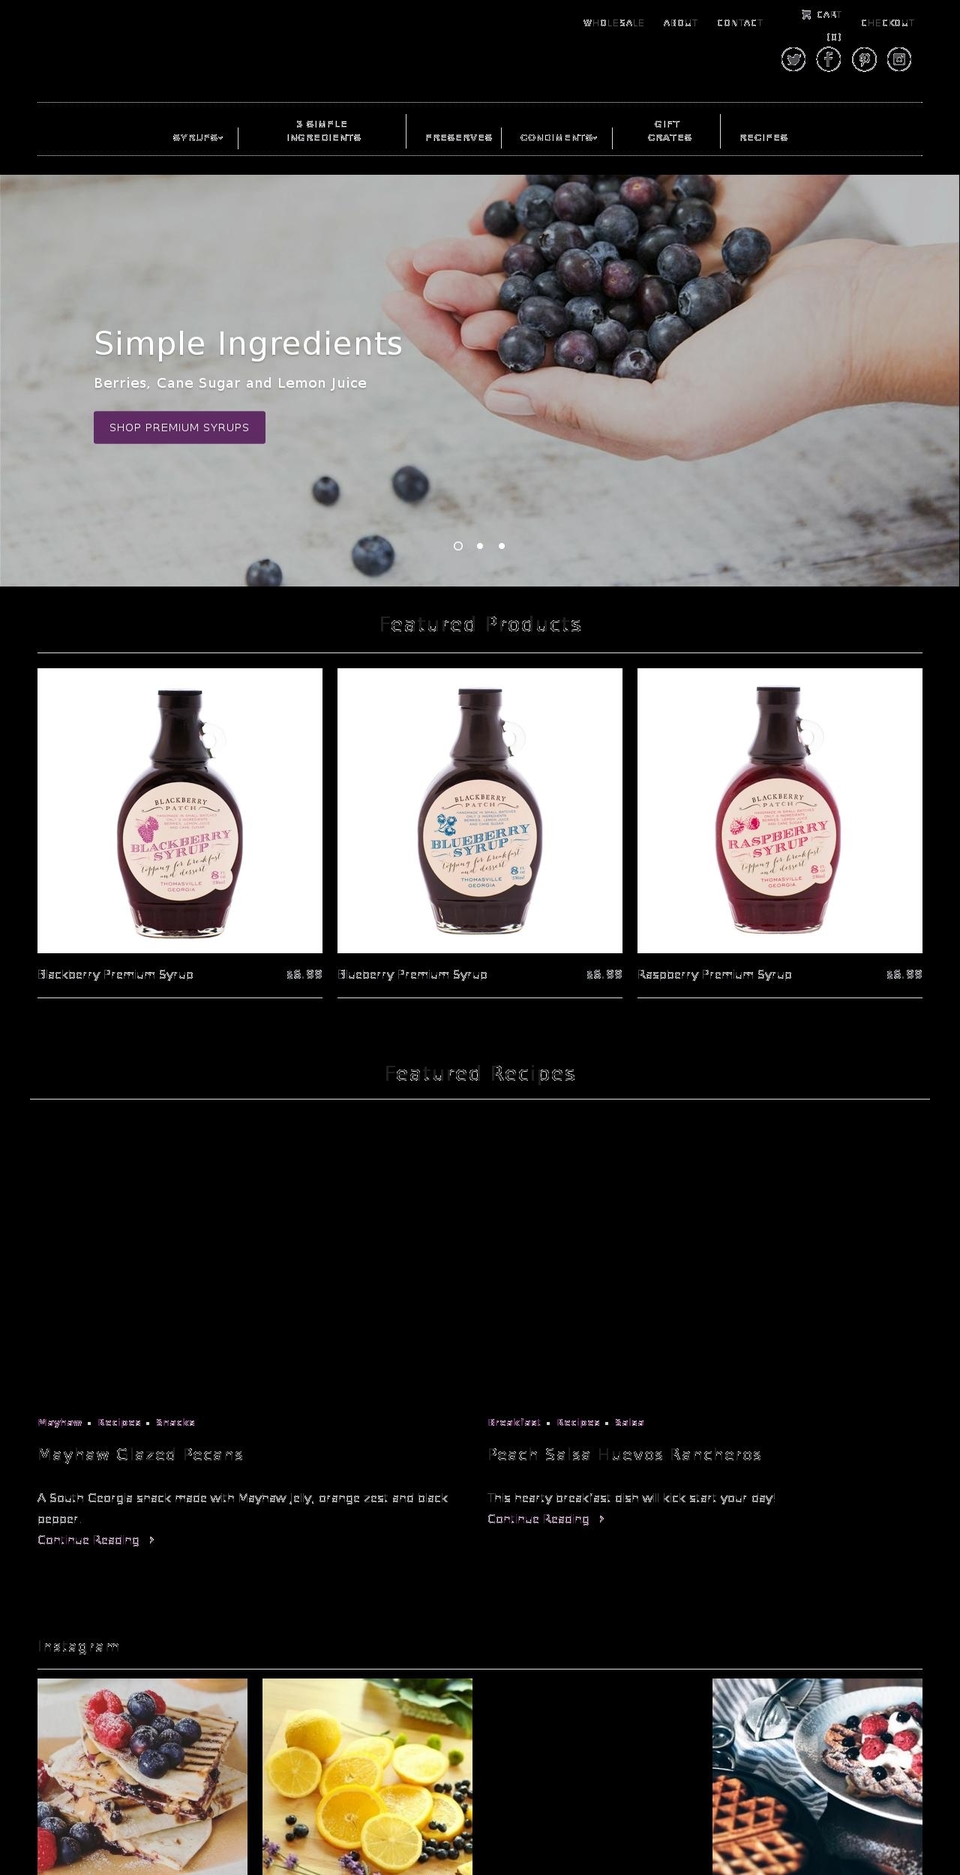 Responsive Shopify theme site example blackberrypatch.com